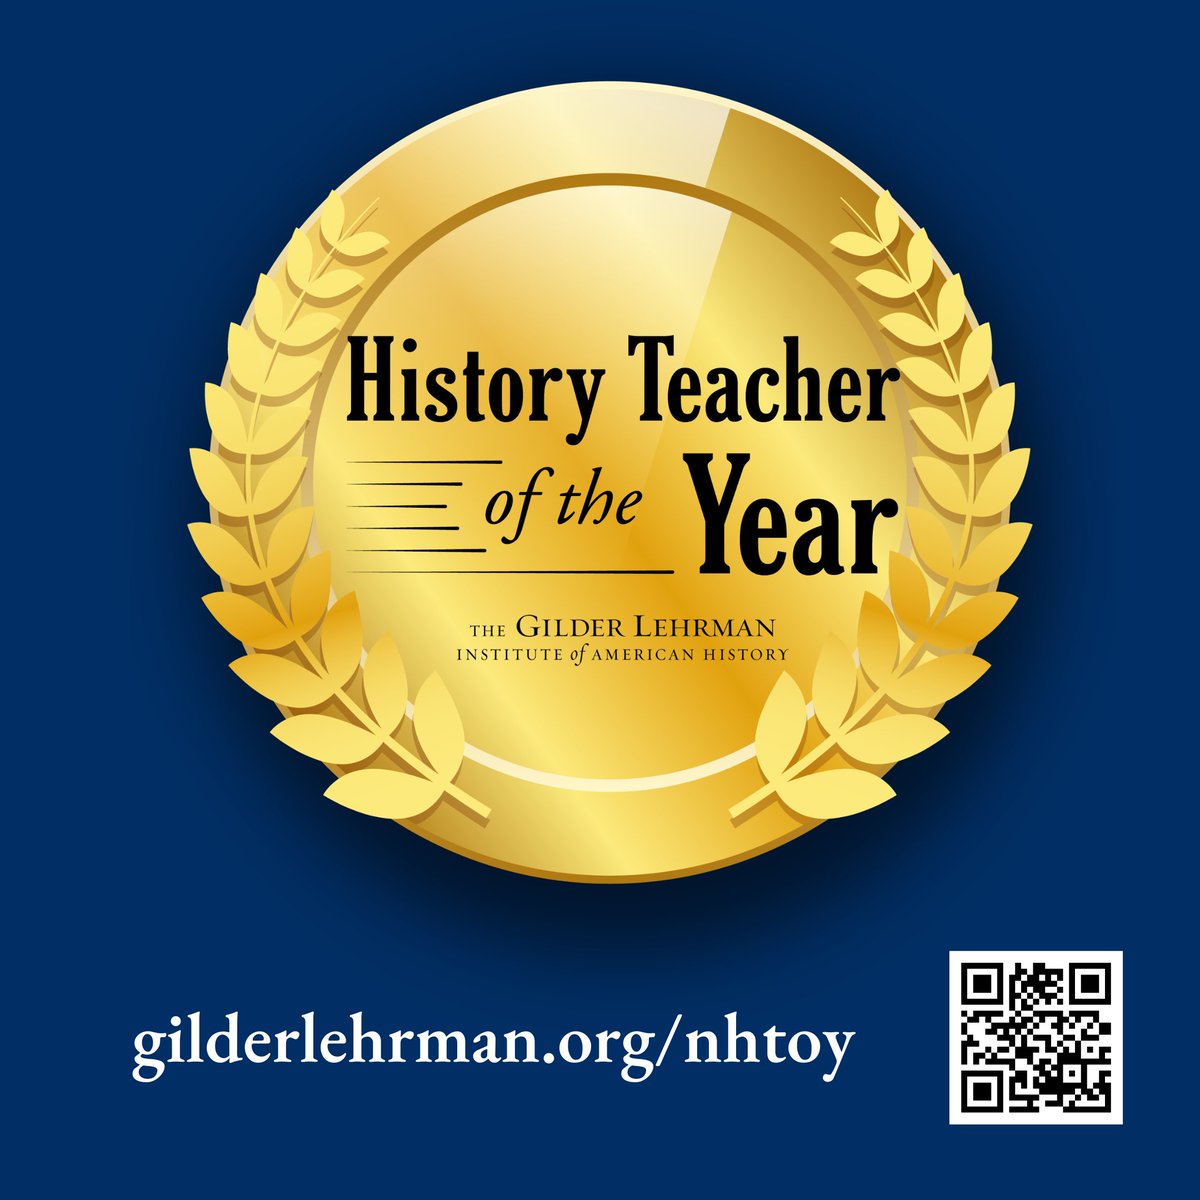 Nominate an outstanding K–12 teacher in your community for the 2024 National History Teacher of the Year! State winners will receive $1,000. The national winner will receive $10,000 and a ceremony in their honor in NYC. ➡️ gilderlehrman.org/nhtoy #sschat #NHTOY #HTOY